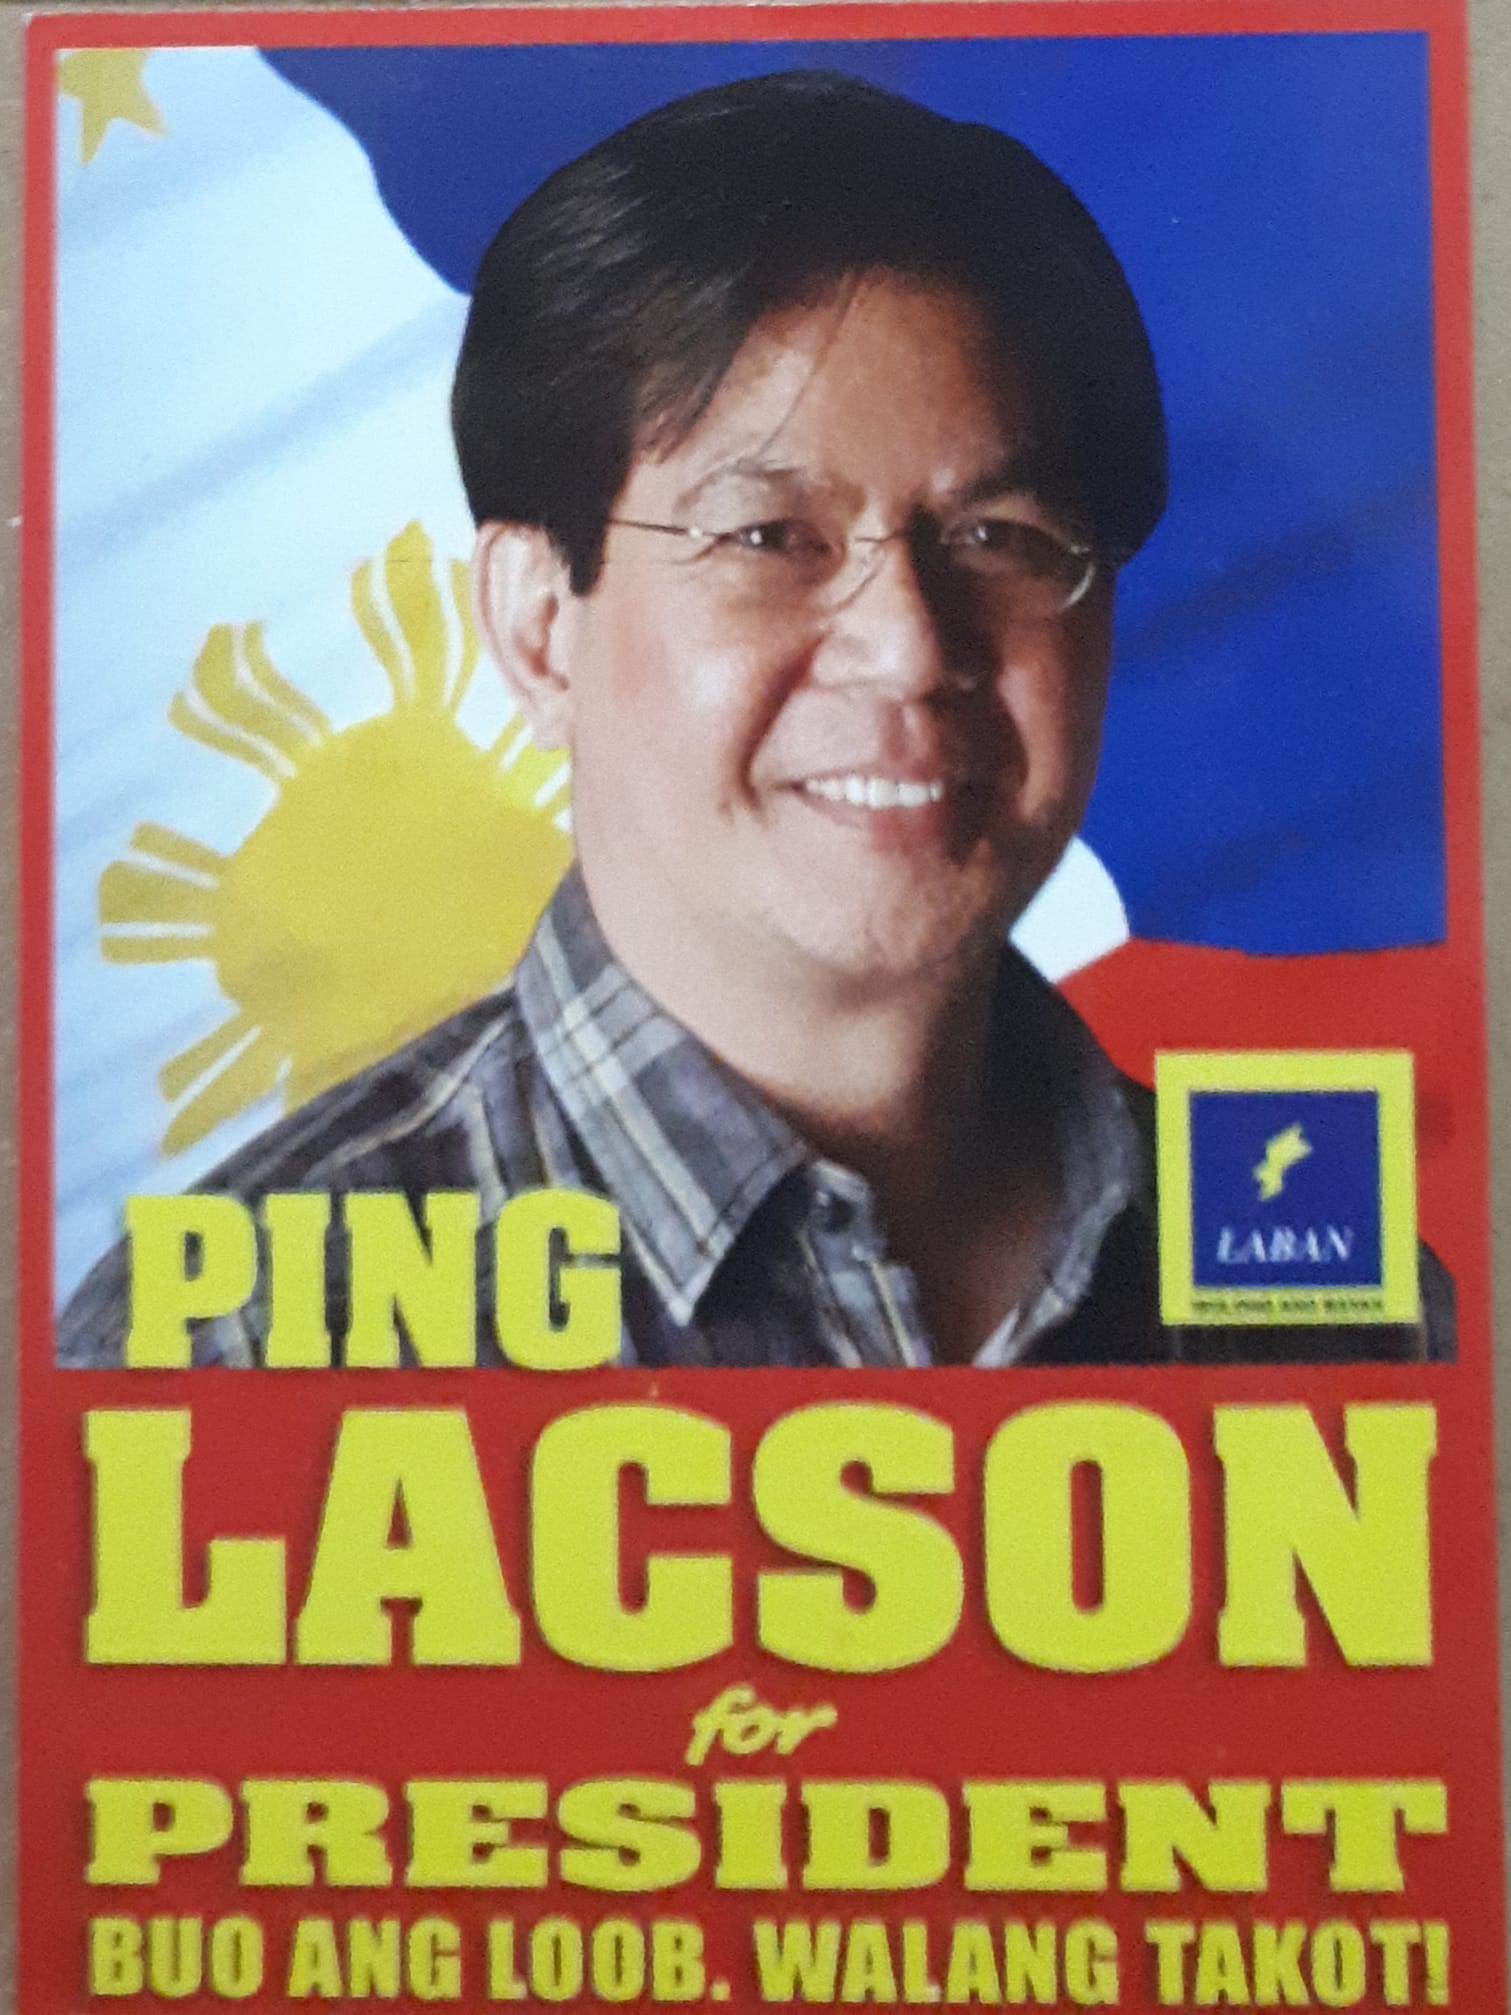 Ping Lacson - 2004 election poster